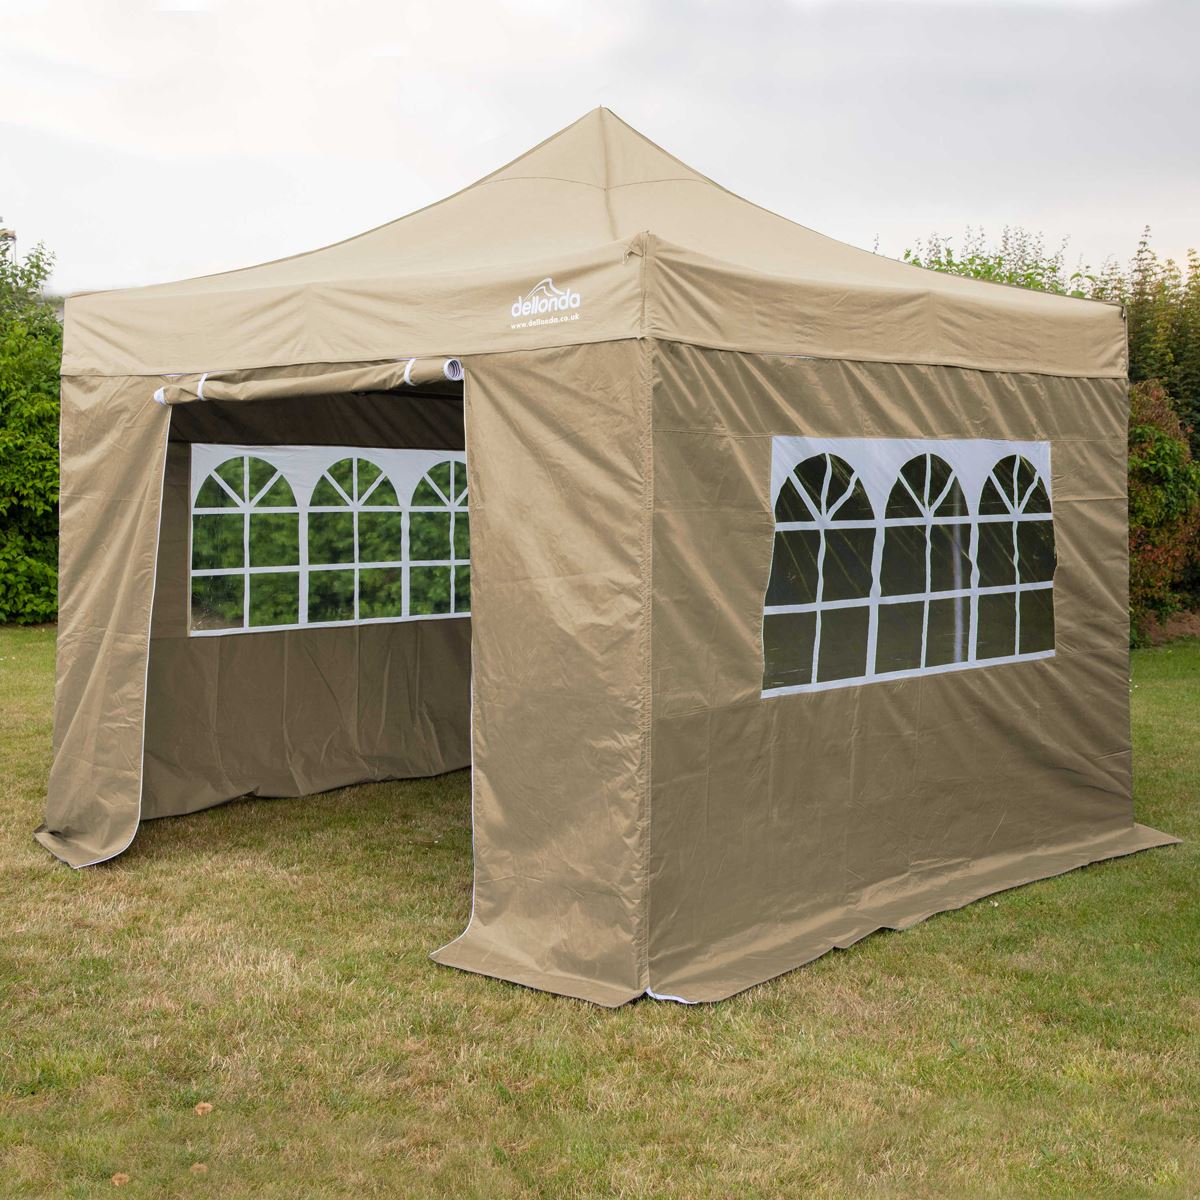 Dellonda Premium 2x2m Pop-Up Gazebo & Side Walls, PVC Coated, Water Resistant Fabric, Supplied with Carry Bag, Rope, Stakes & Weight Bags - Beige